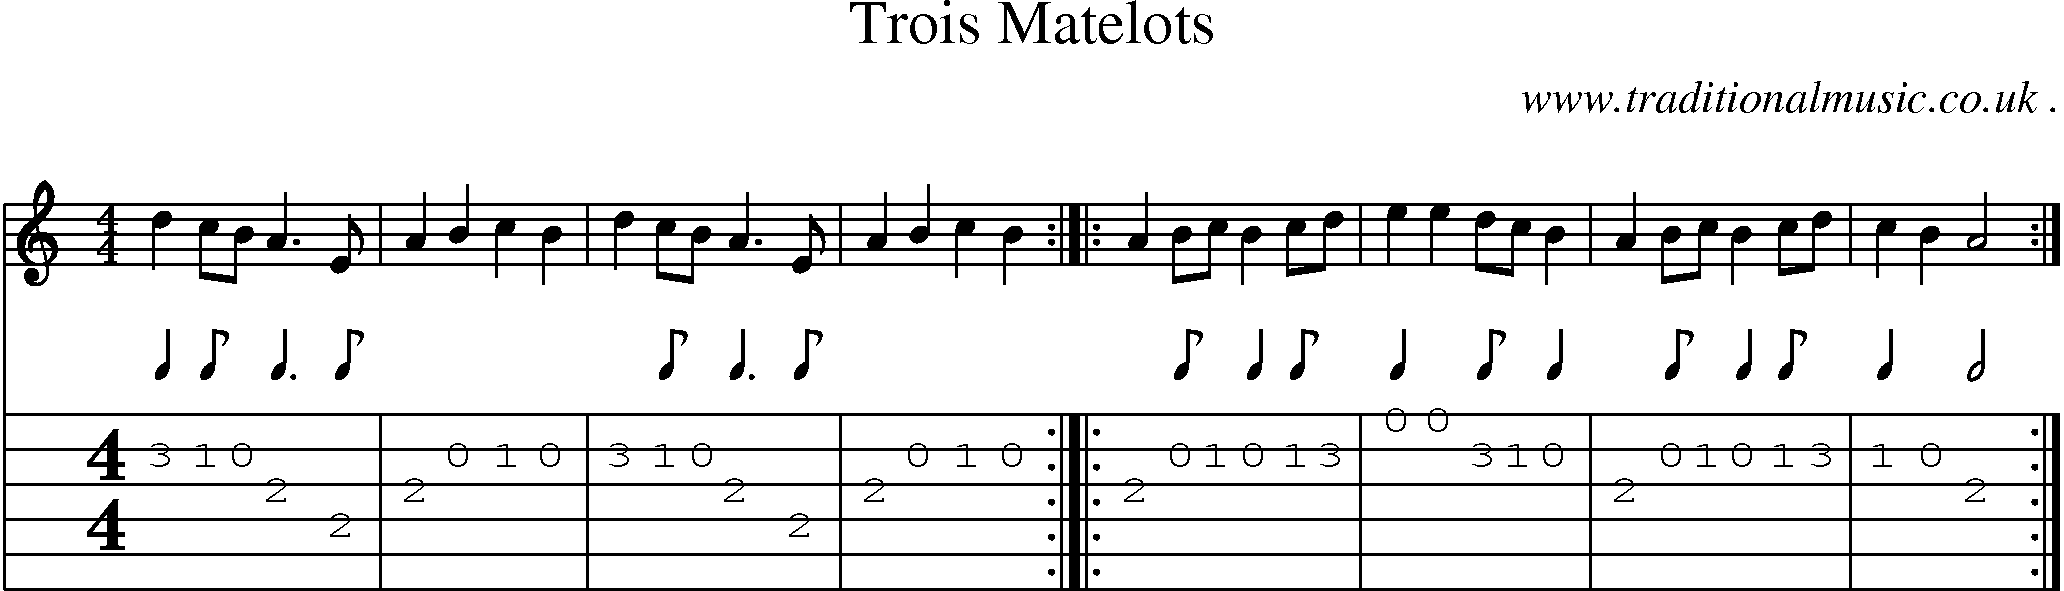 Sheet-Music and Guitar Tabs for Trois Matelots